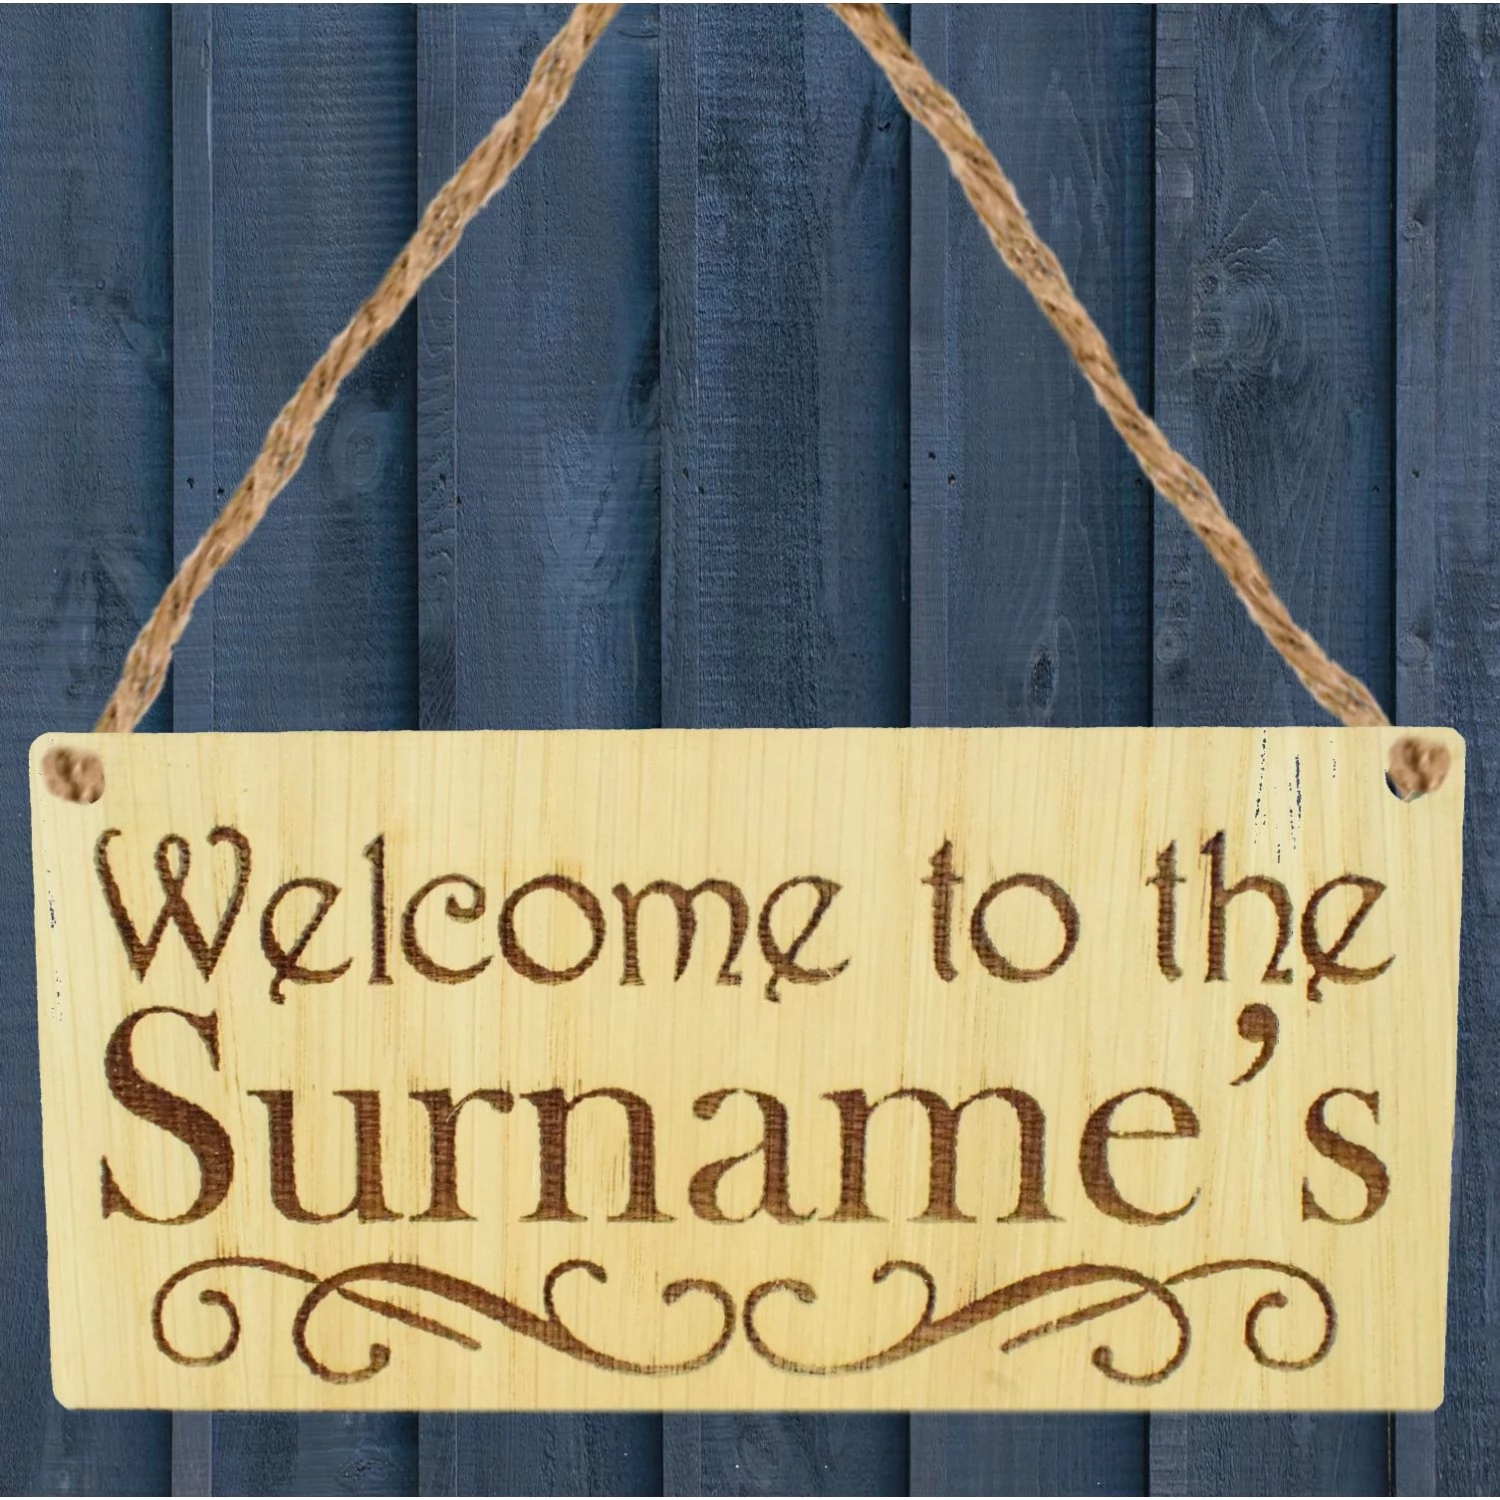 The leading supplier of Engraved Plaques